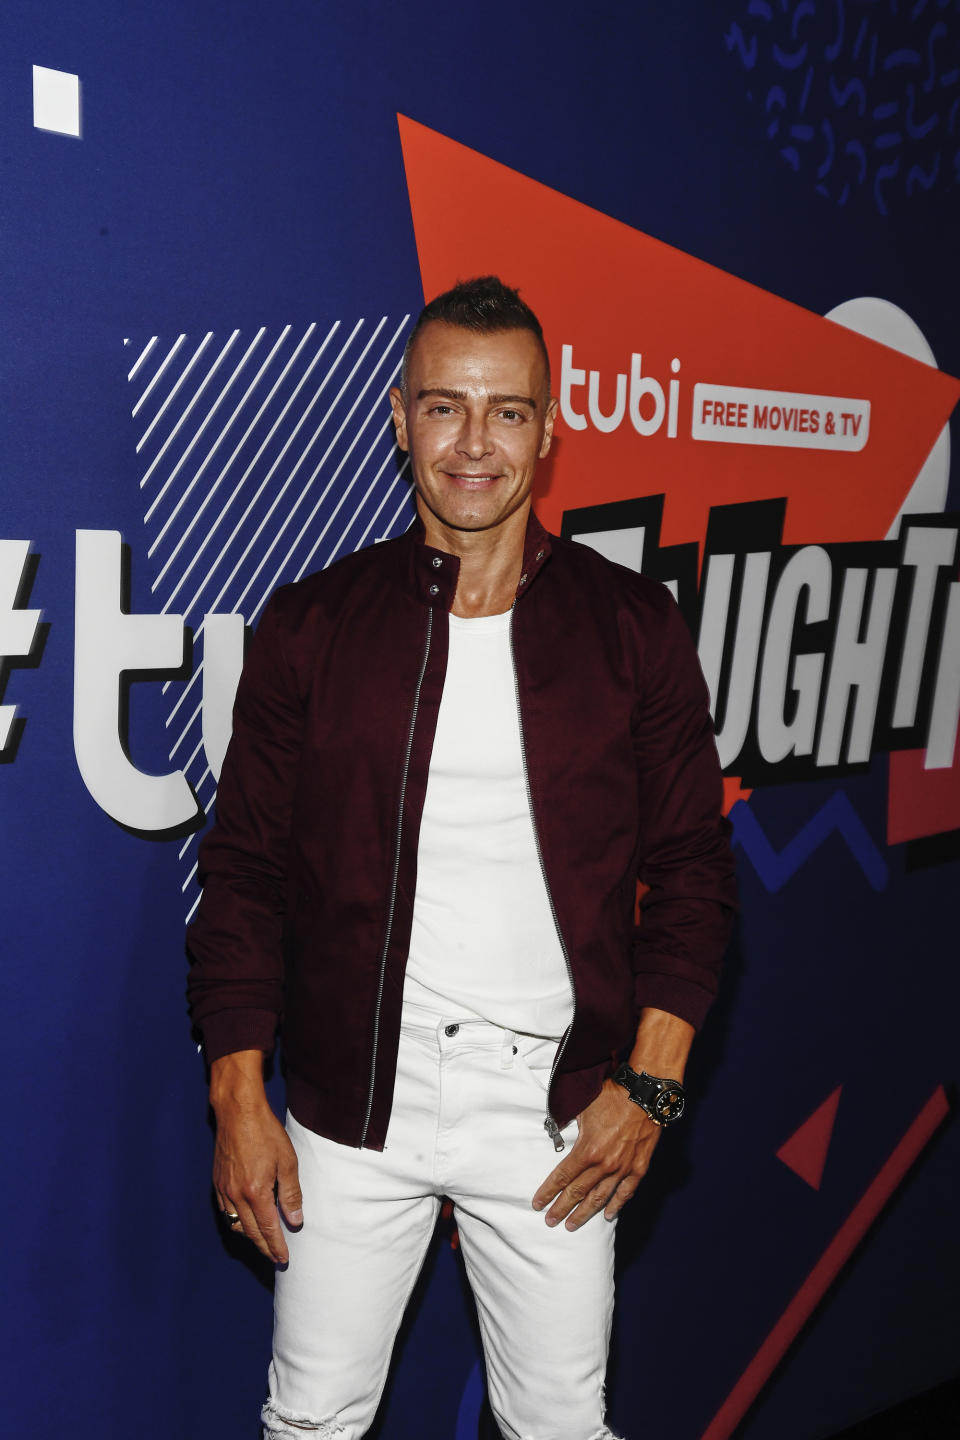 Joey Lawrence attends the Tubi x TikTok first ever live form reunion show at Sneakertopia in Los Angeles, California on June 30, 2021. (Photo by Michael Buckner/Penske Media via Getty Images)